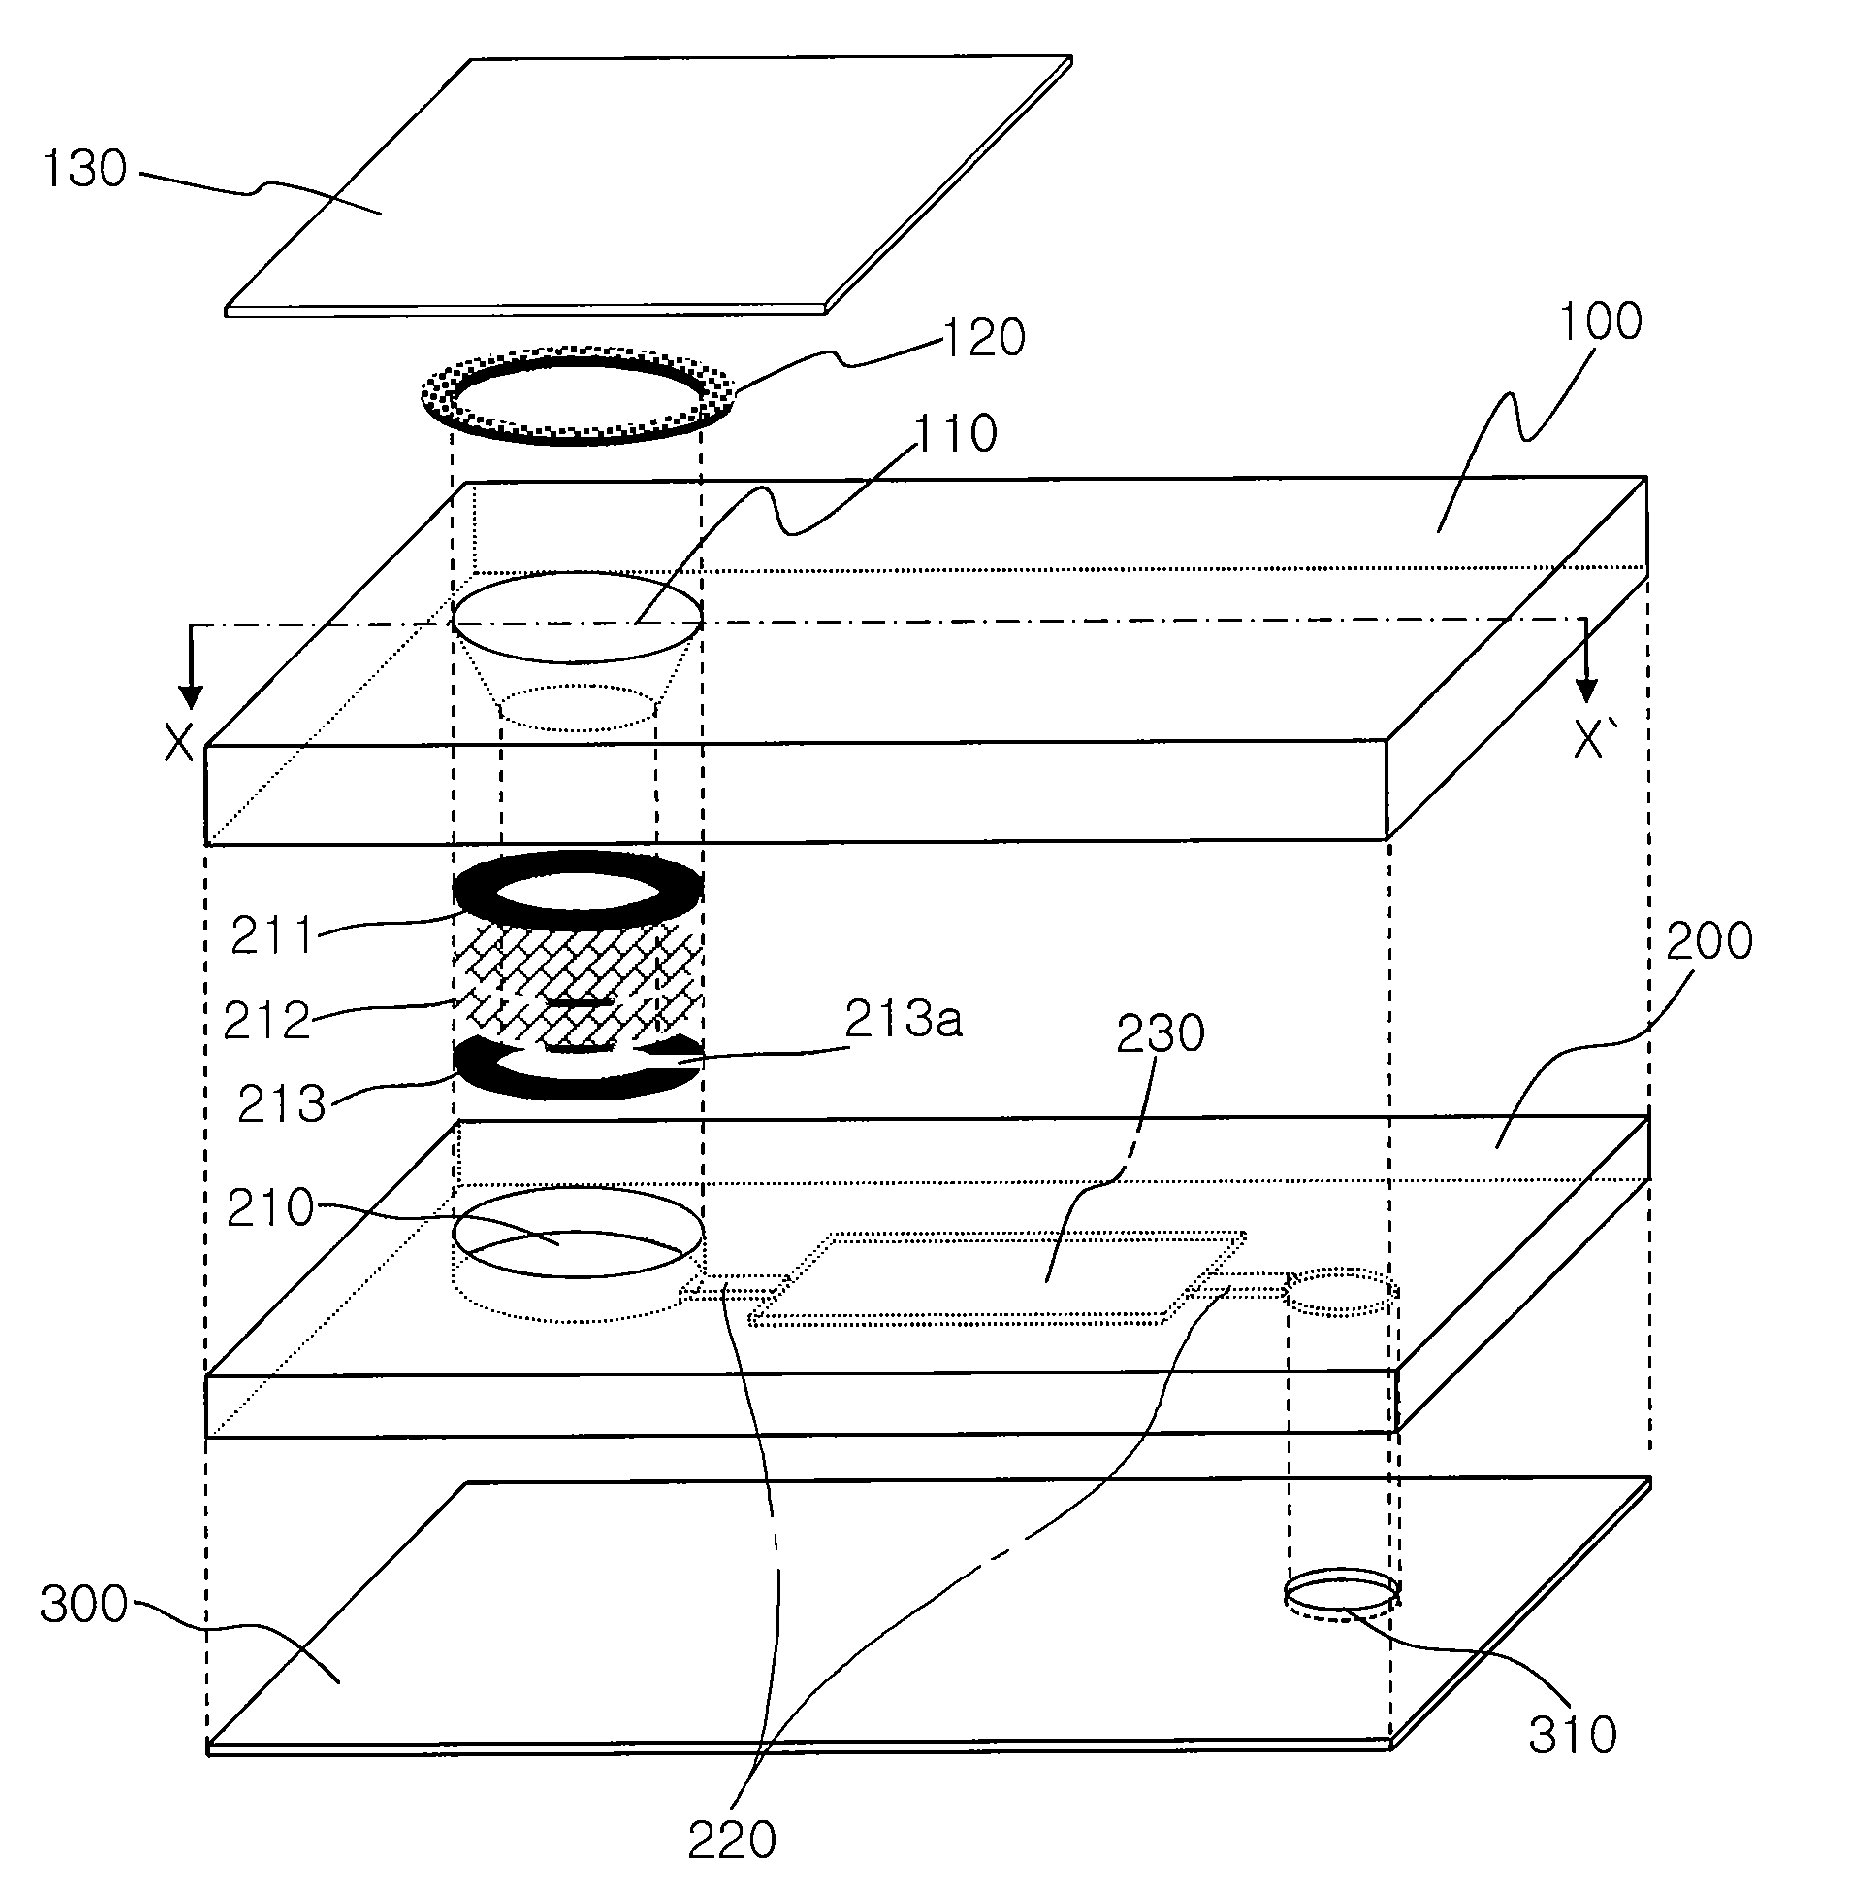 Disposable multi-layered filtration device for the separation of blood plasma